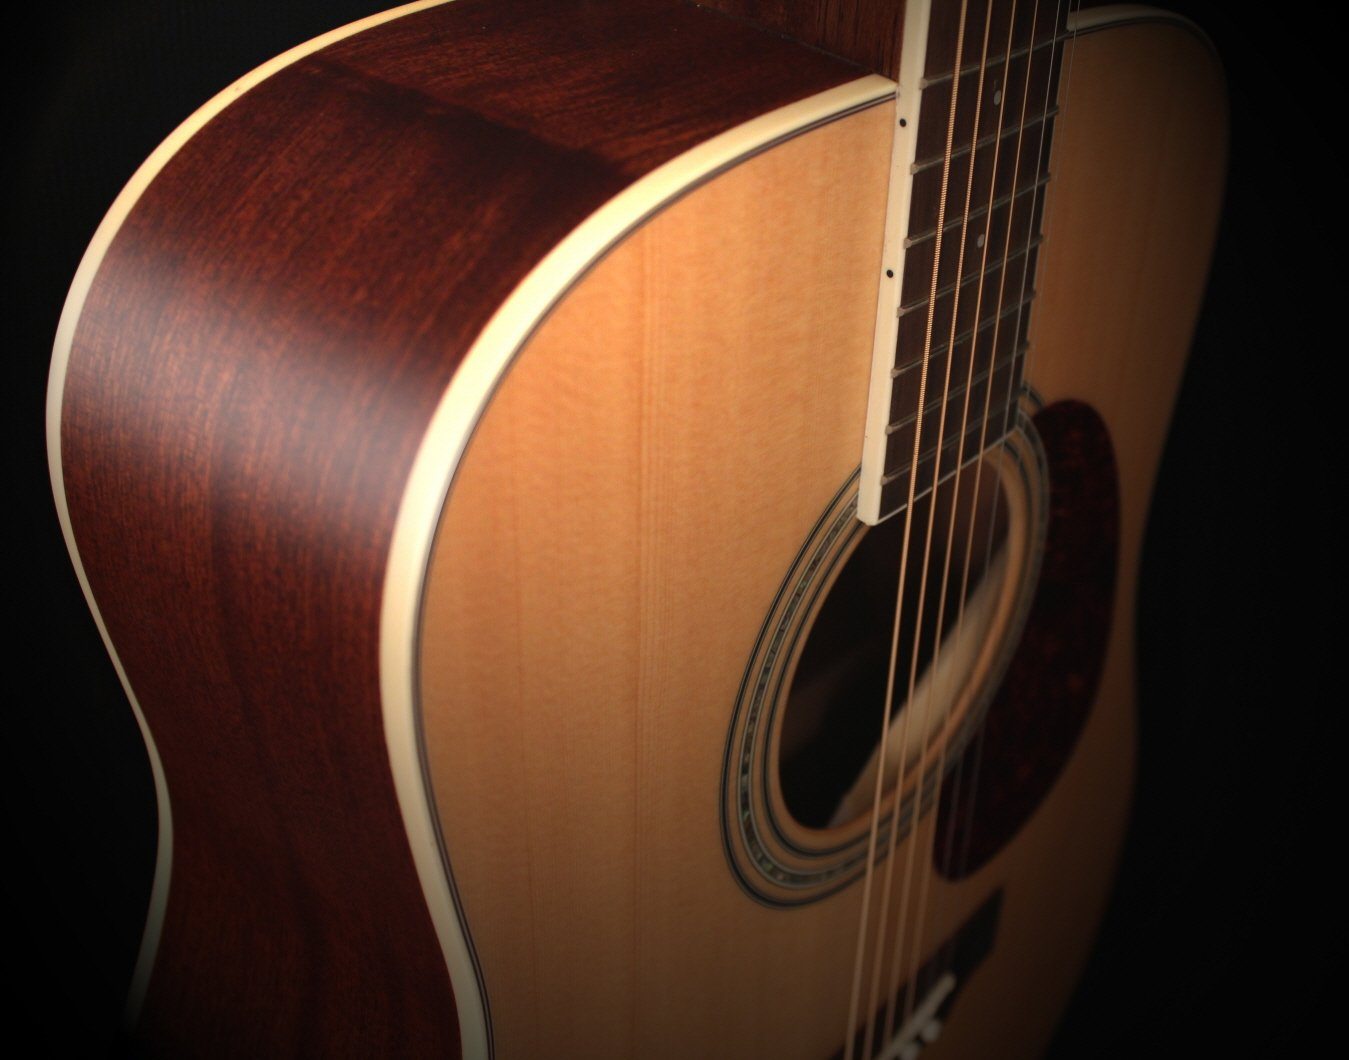 Cort Earth 100 Natural Satin, Acoustic Guitar for sale at Richards Guitars.